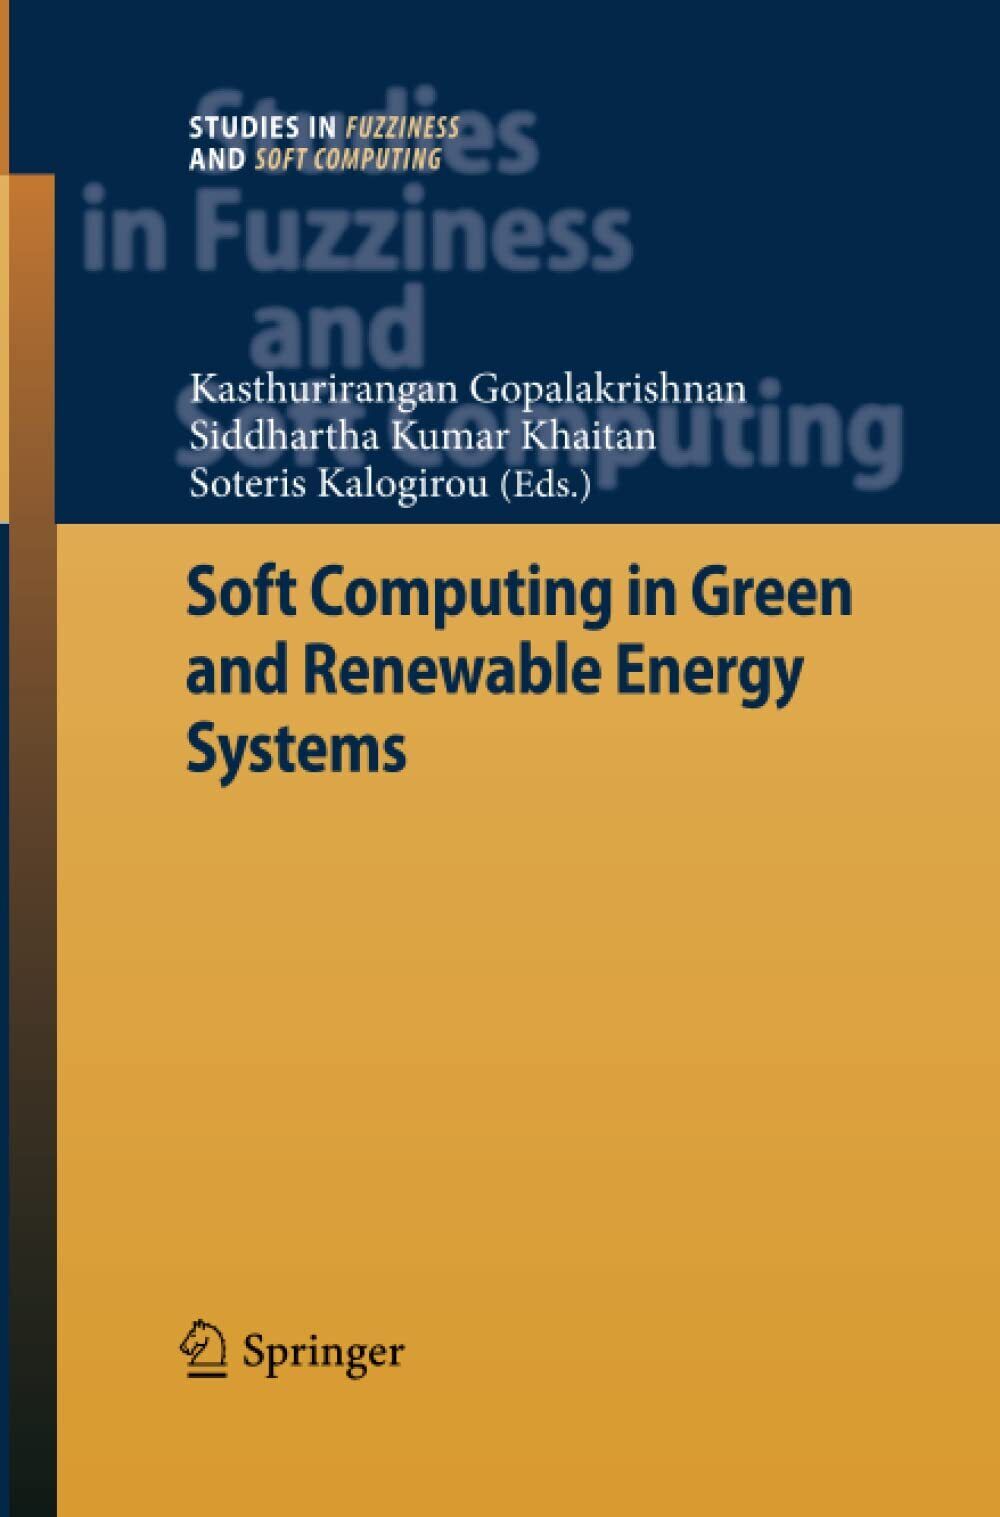 Soft Computing in Green and Renewable Energy Systems - Springer, 2016